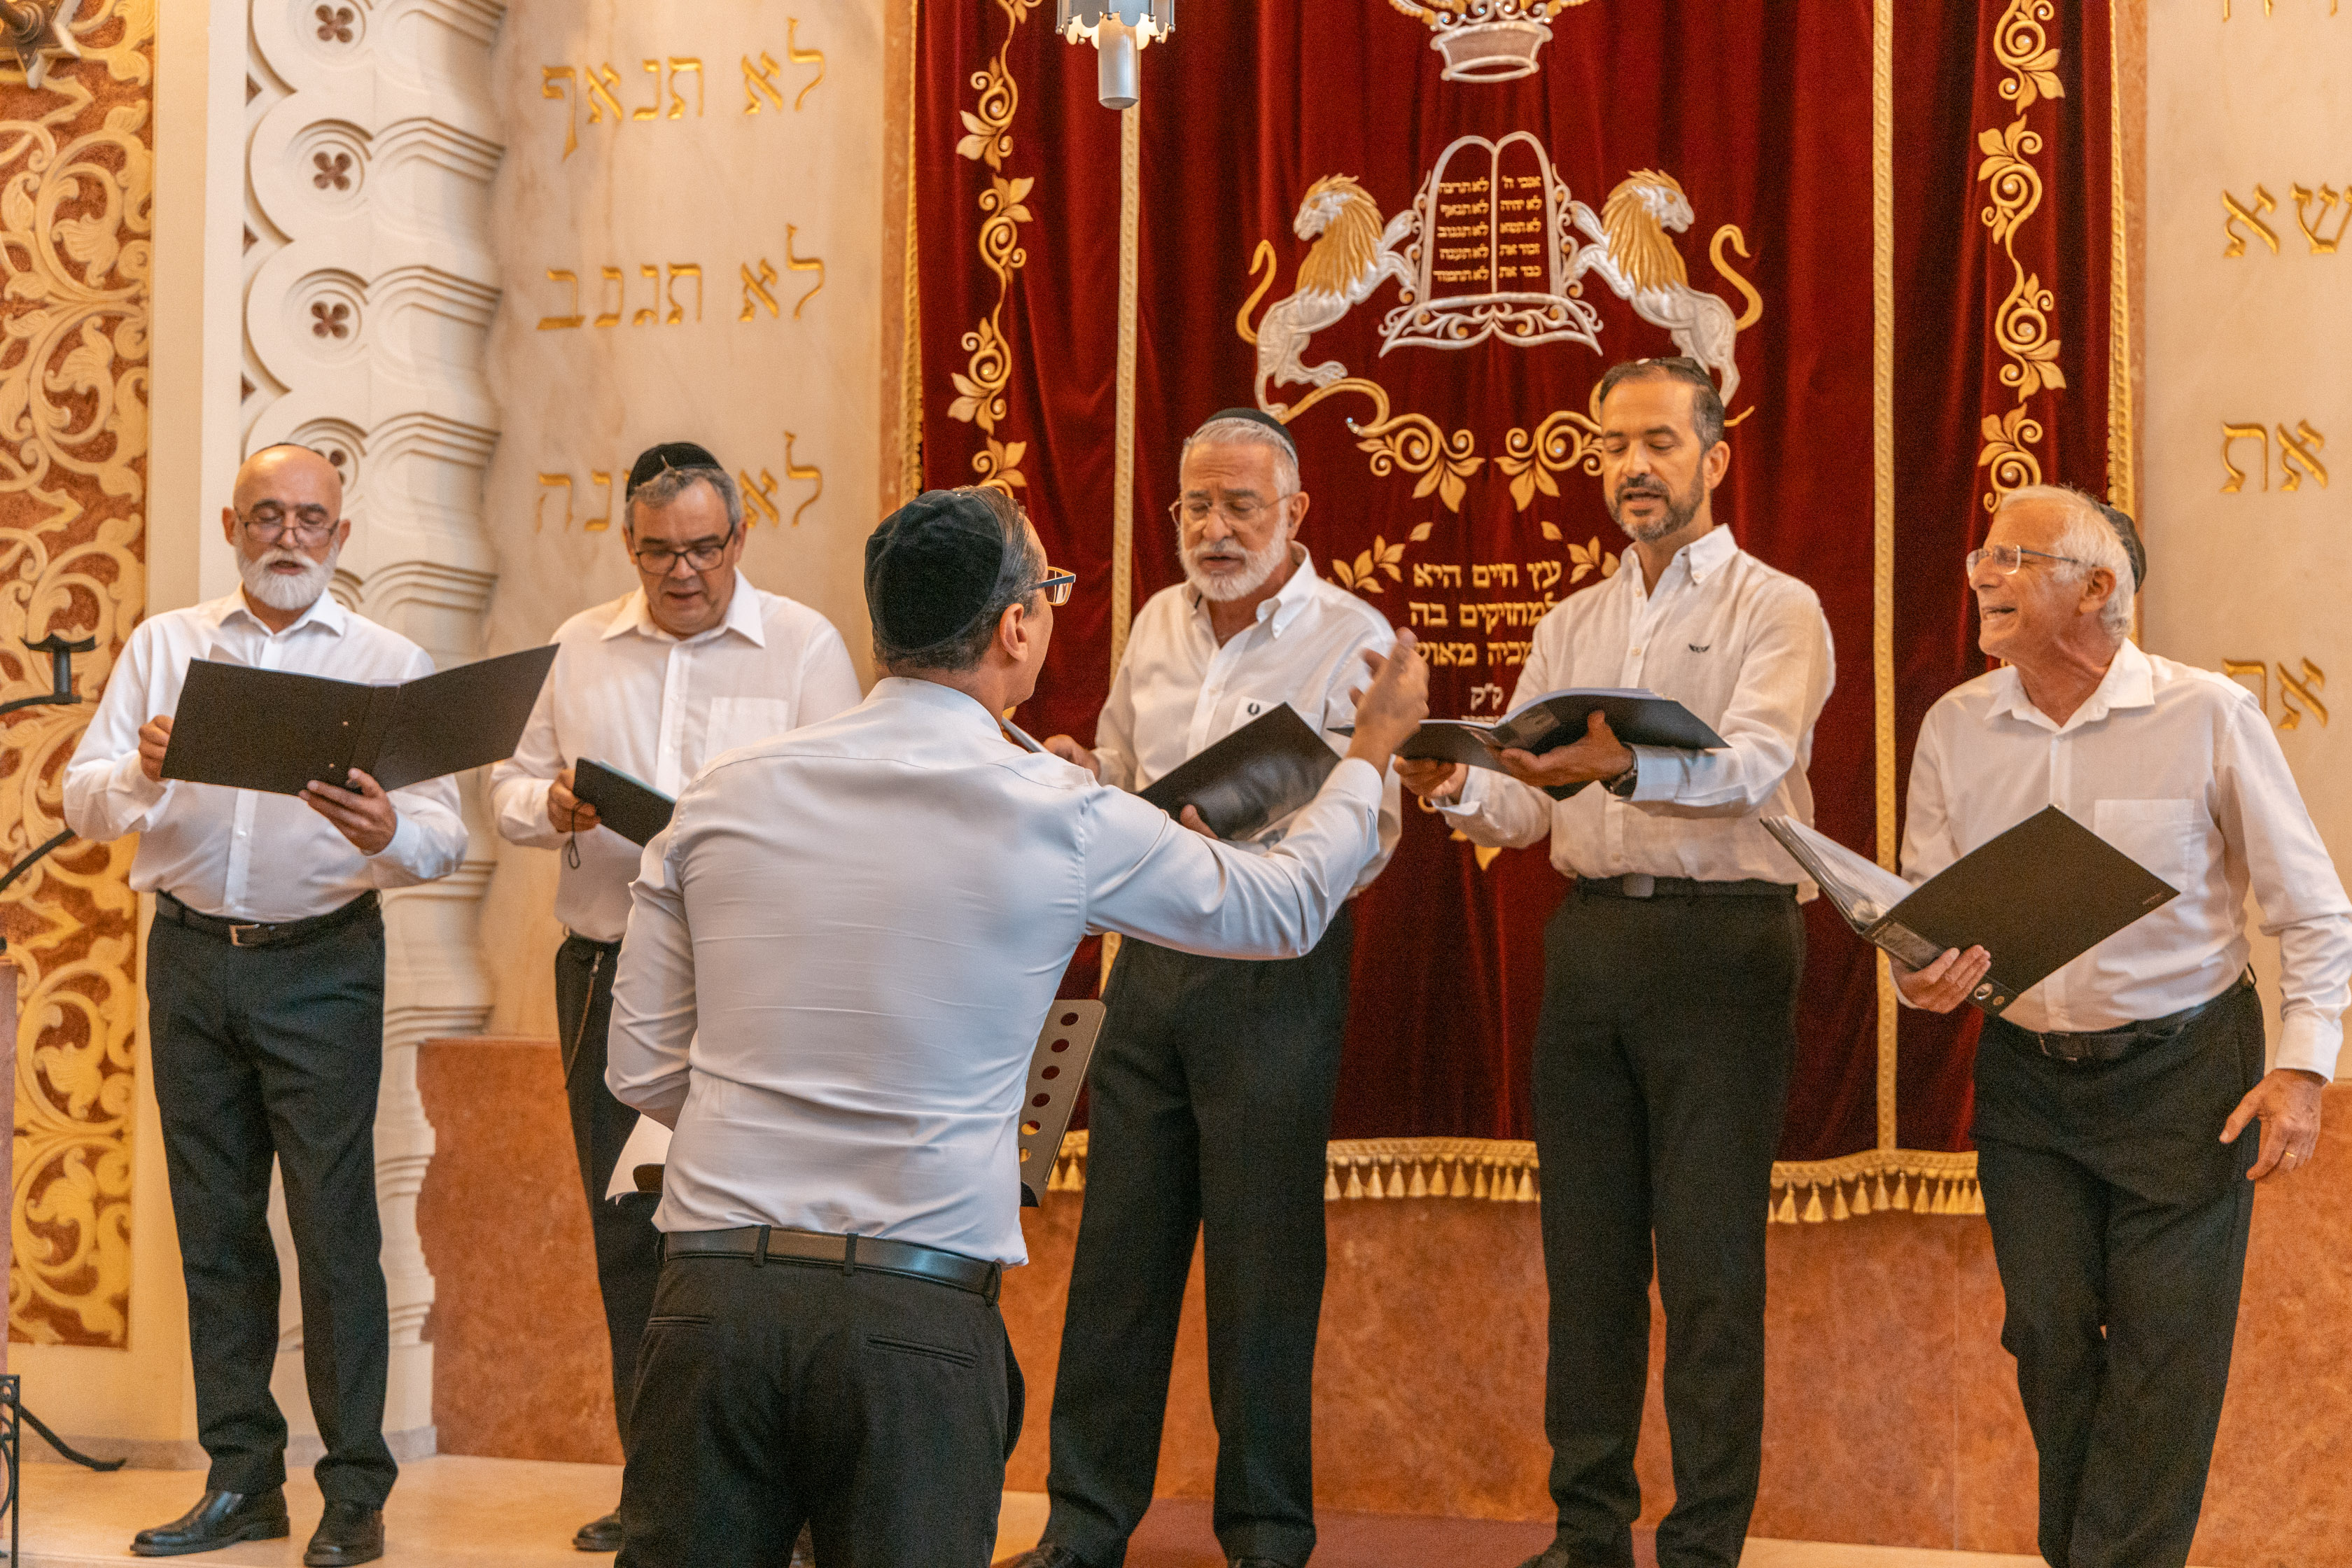 A Song of Ascents: Three years of activity of the Mekor Haim Choir